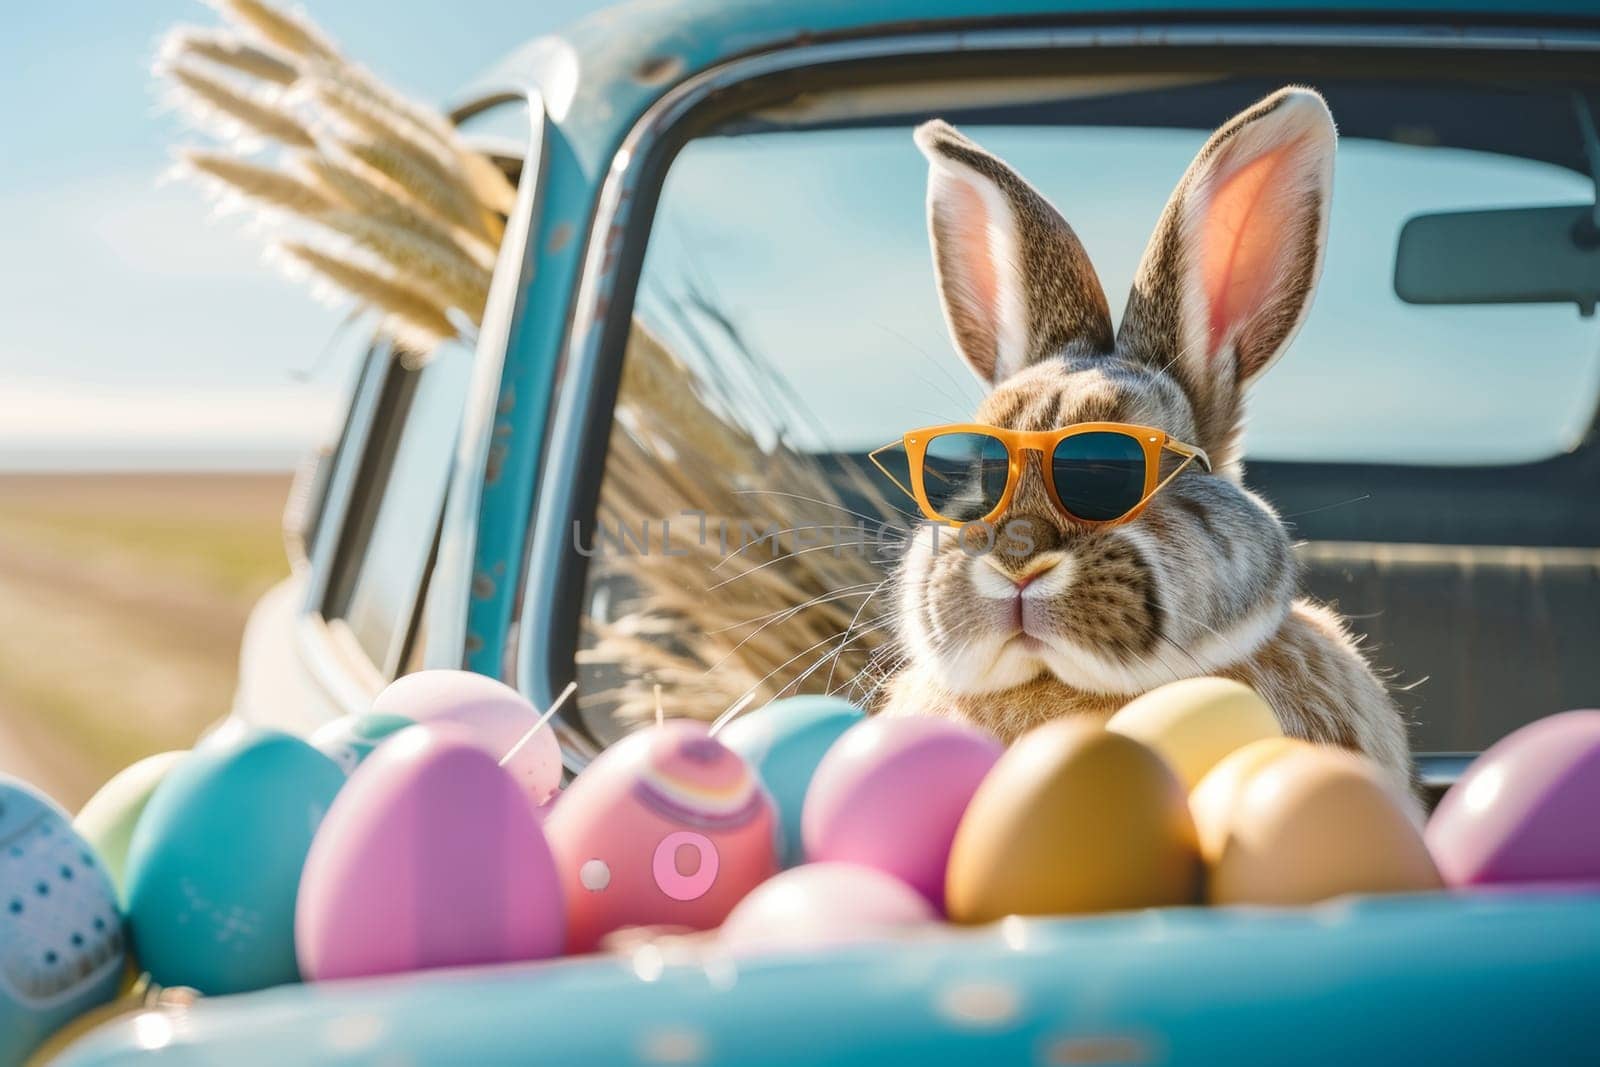 A rabbit wearing sunglasses sits in a car with a bunch of Easter eggs. The scene is playful and lighthearted, with the rabbit looking cool and relaxed in its sunglasses